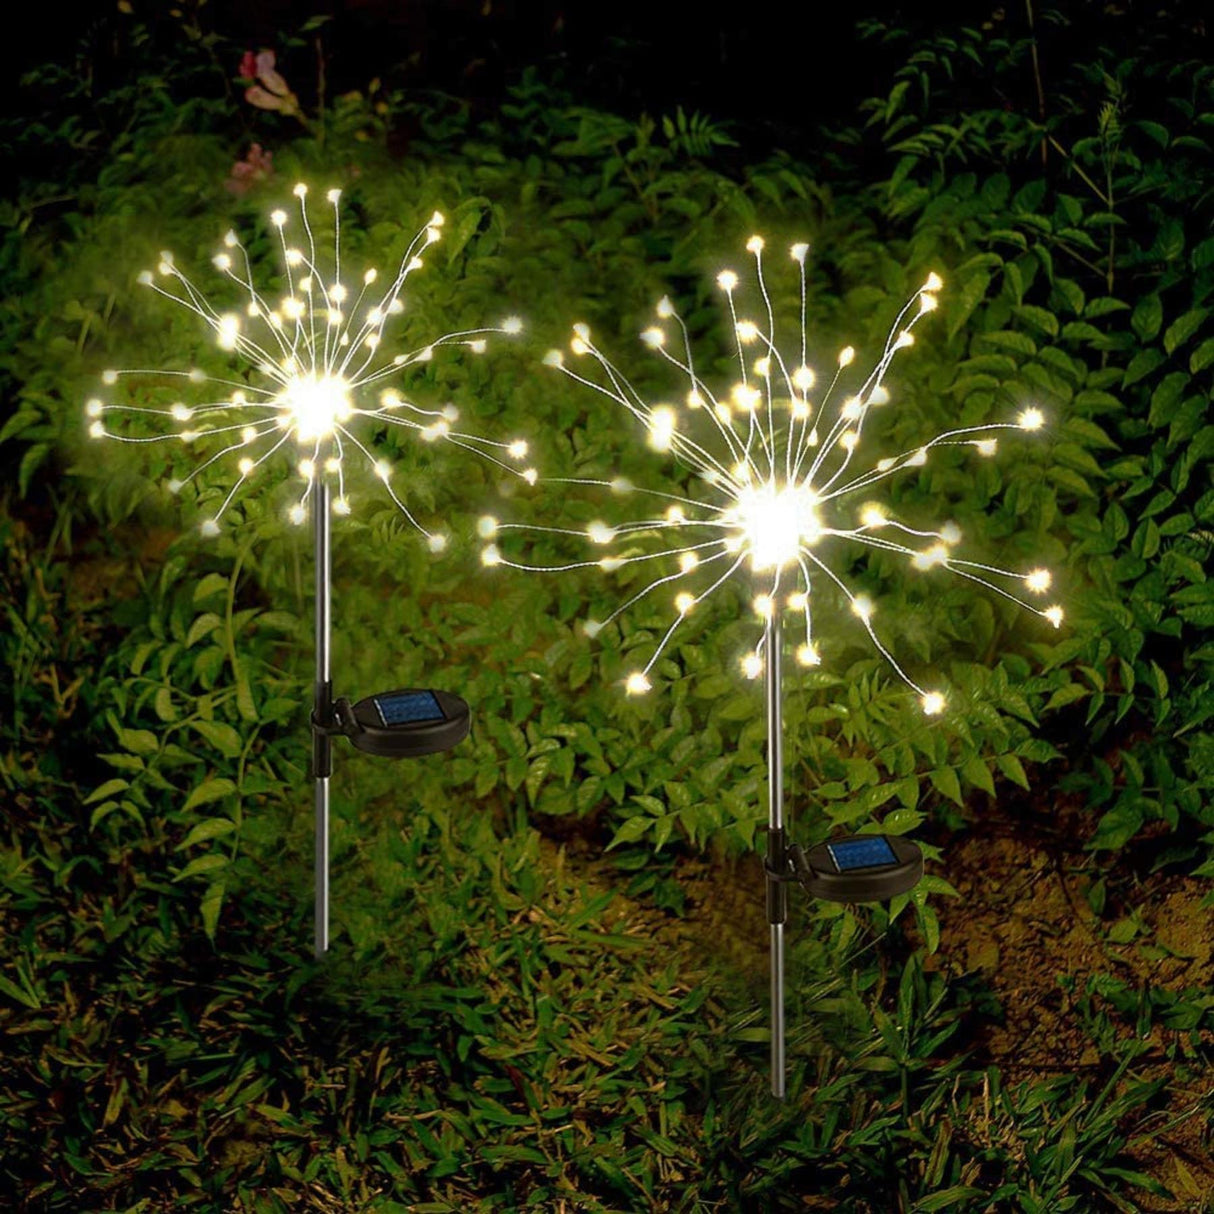 90 Led Starburst Solar Powered Stake Lights 2 Pack by Geezy - UKBuyZone